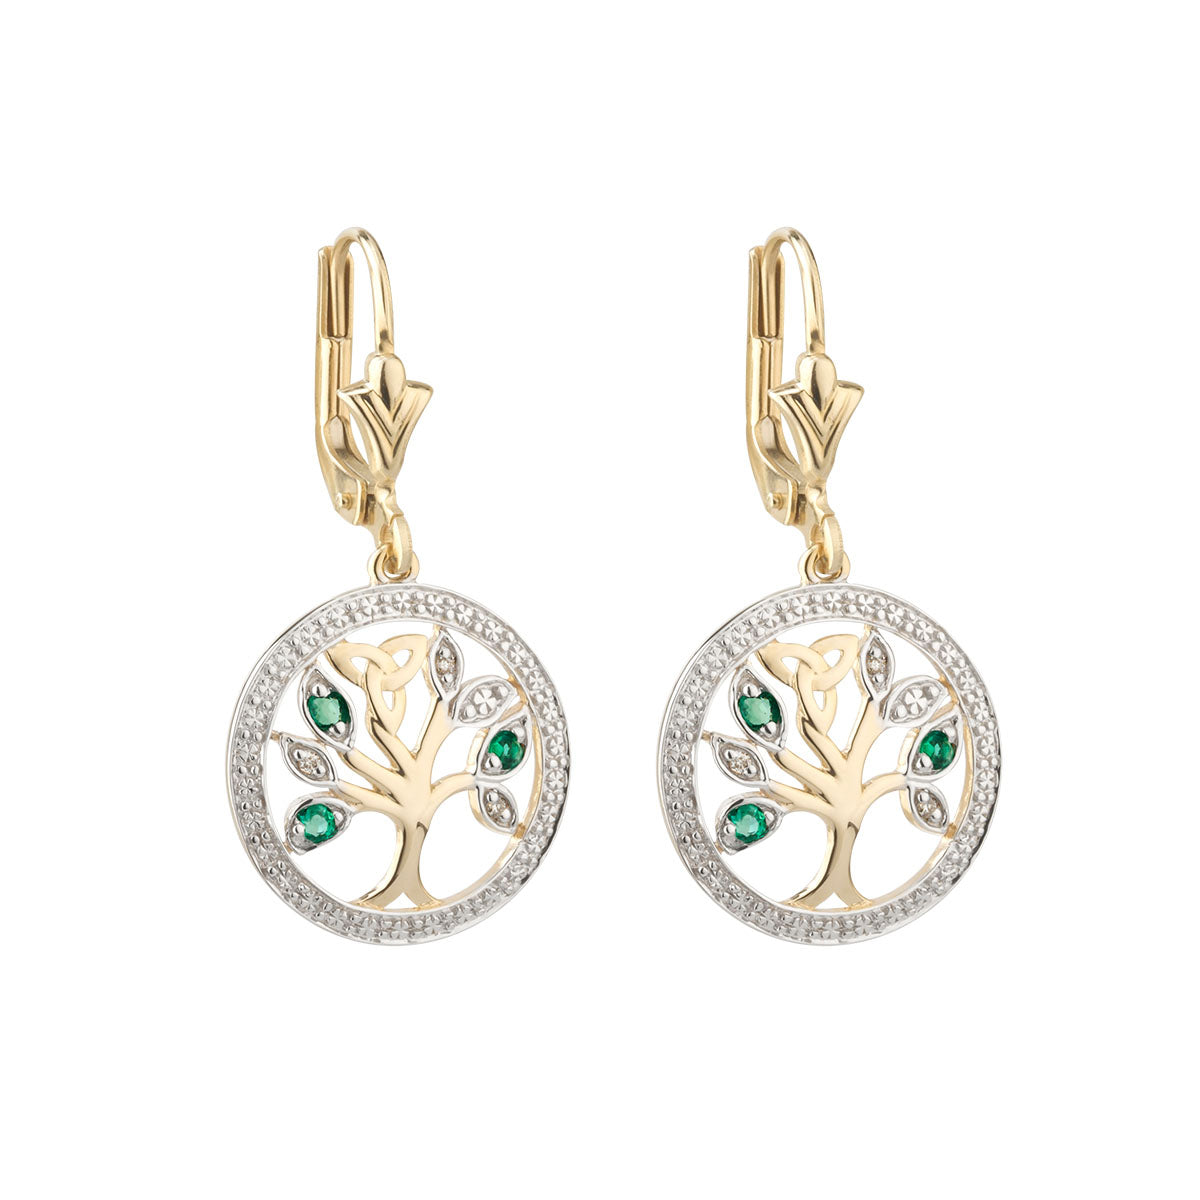 14K gold diamond and emerald tree of life earrings s33748 from Solvar